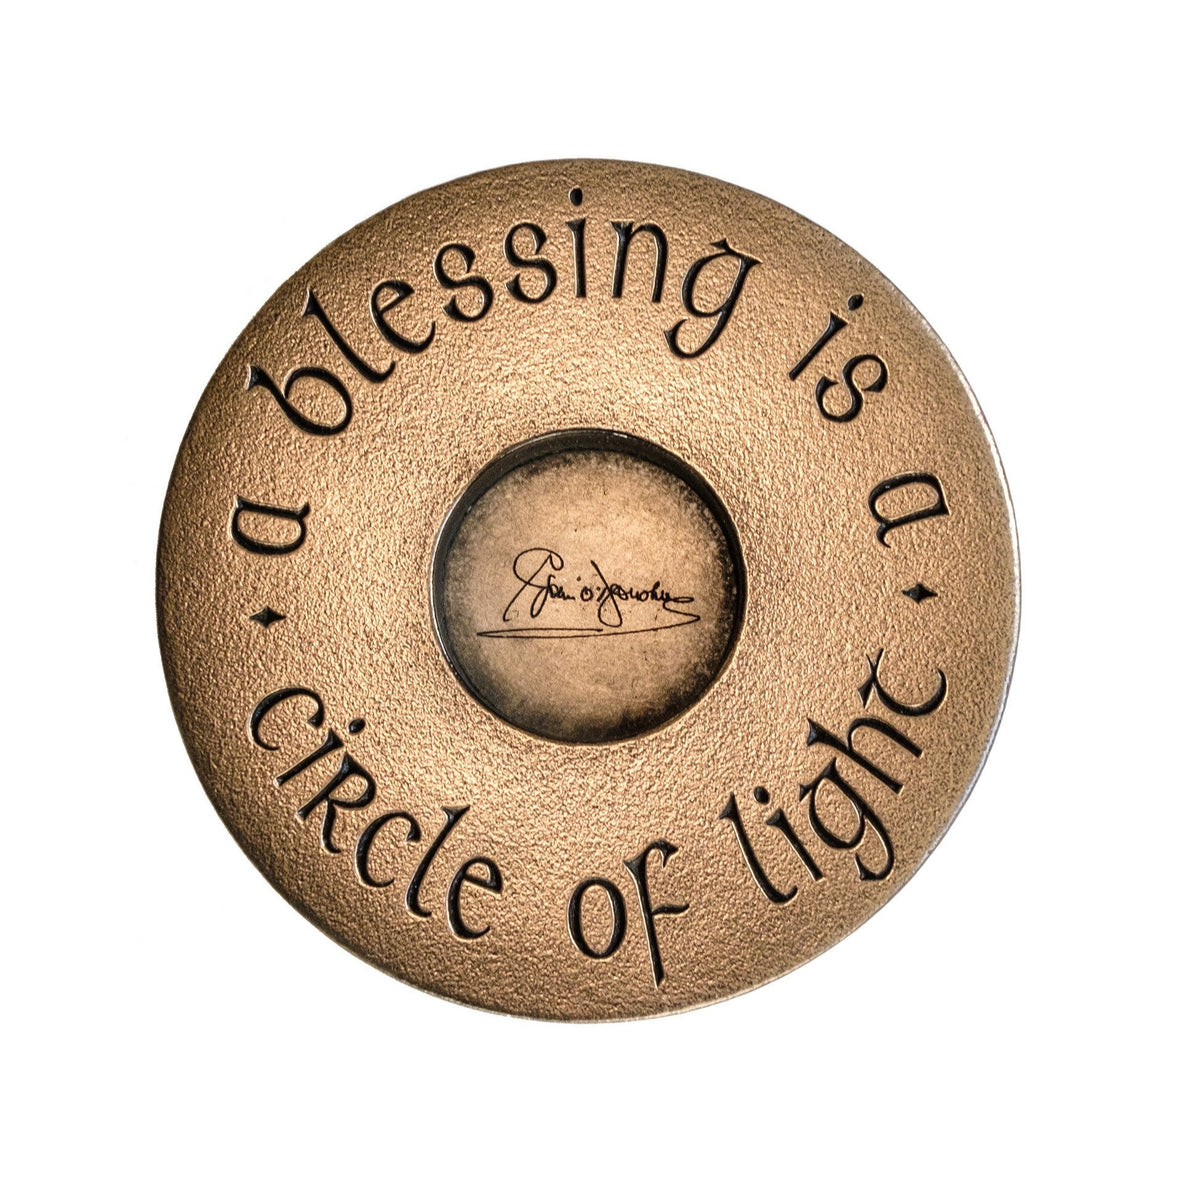 A blessing is a circle of light (tabletop)